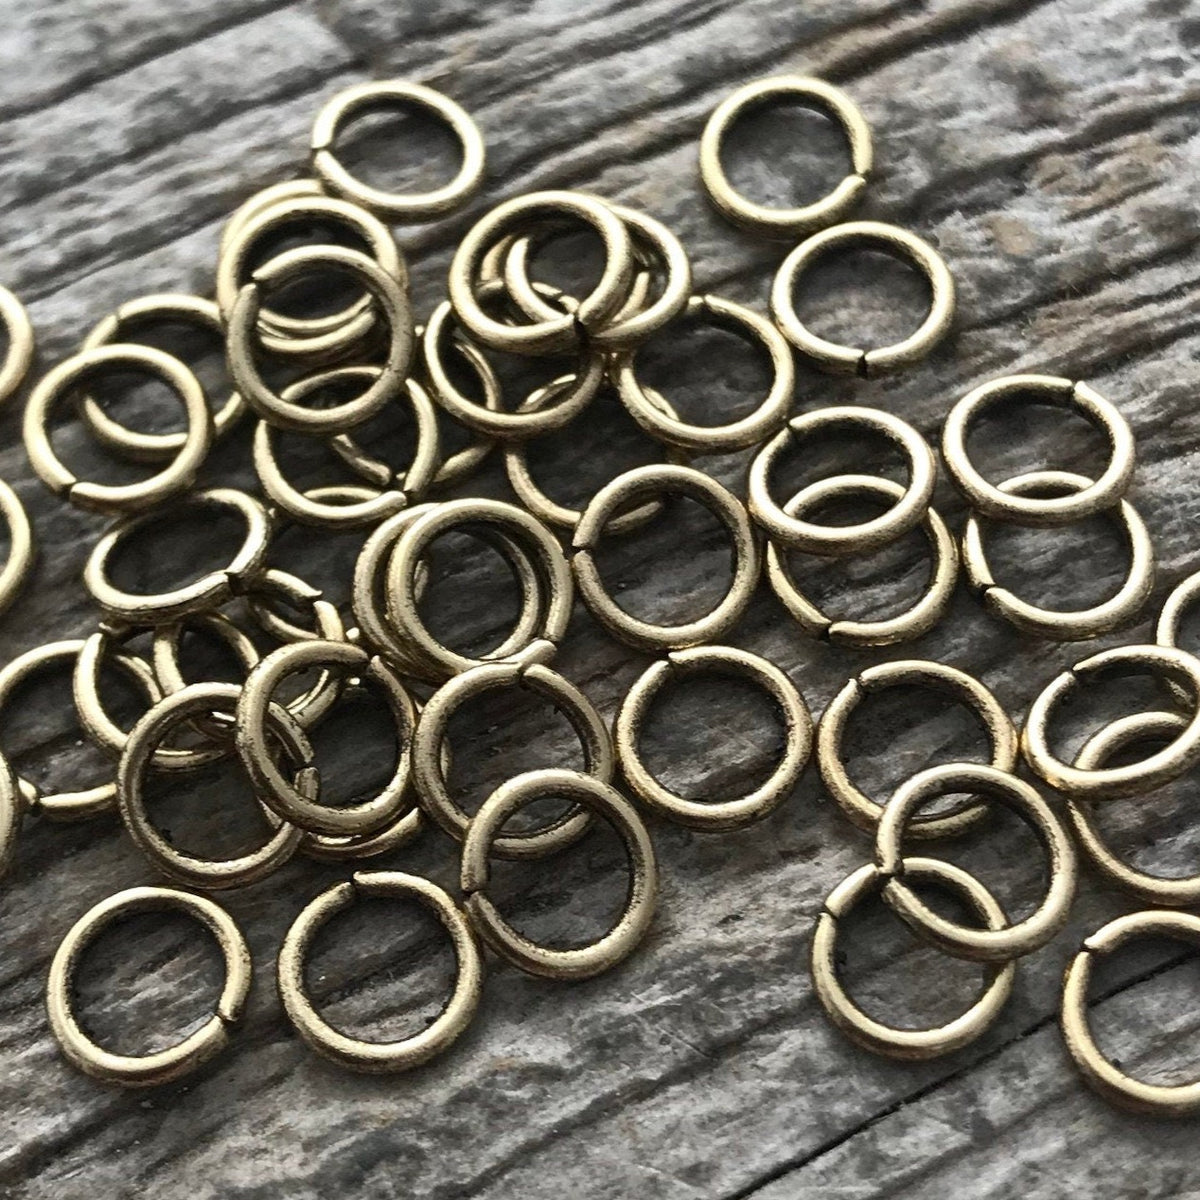 9mm Large Antiqued Gold Jump Rings, Textured Jump Ring, Brass Jump Rings,  10 rings, GL-3007